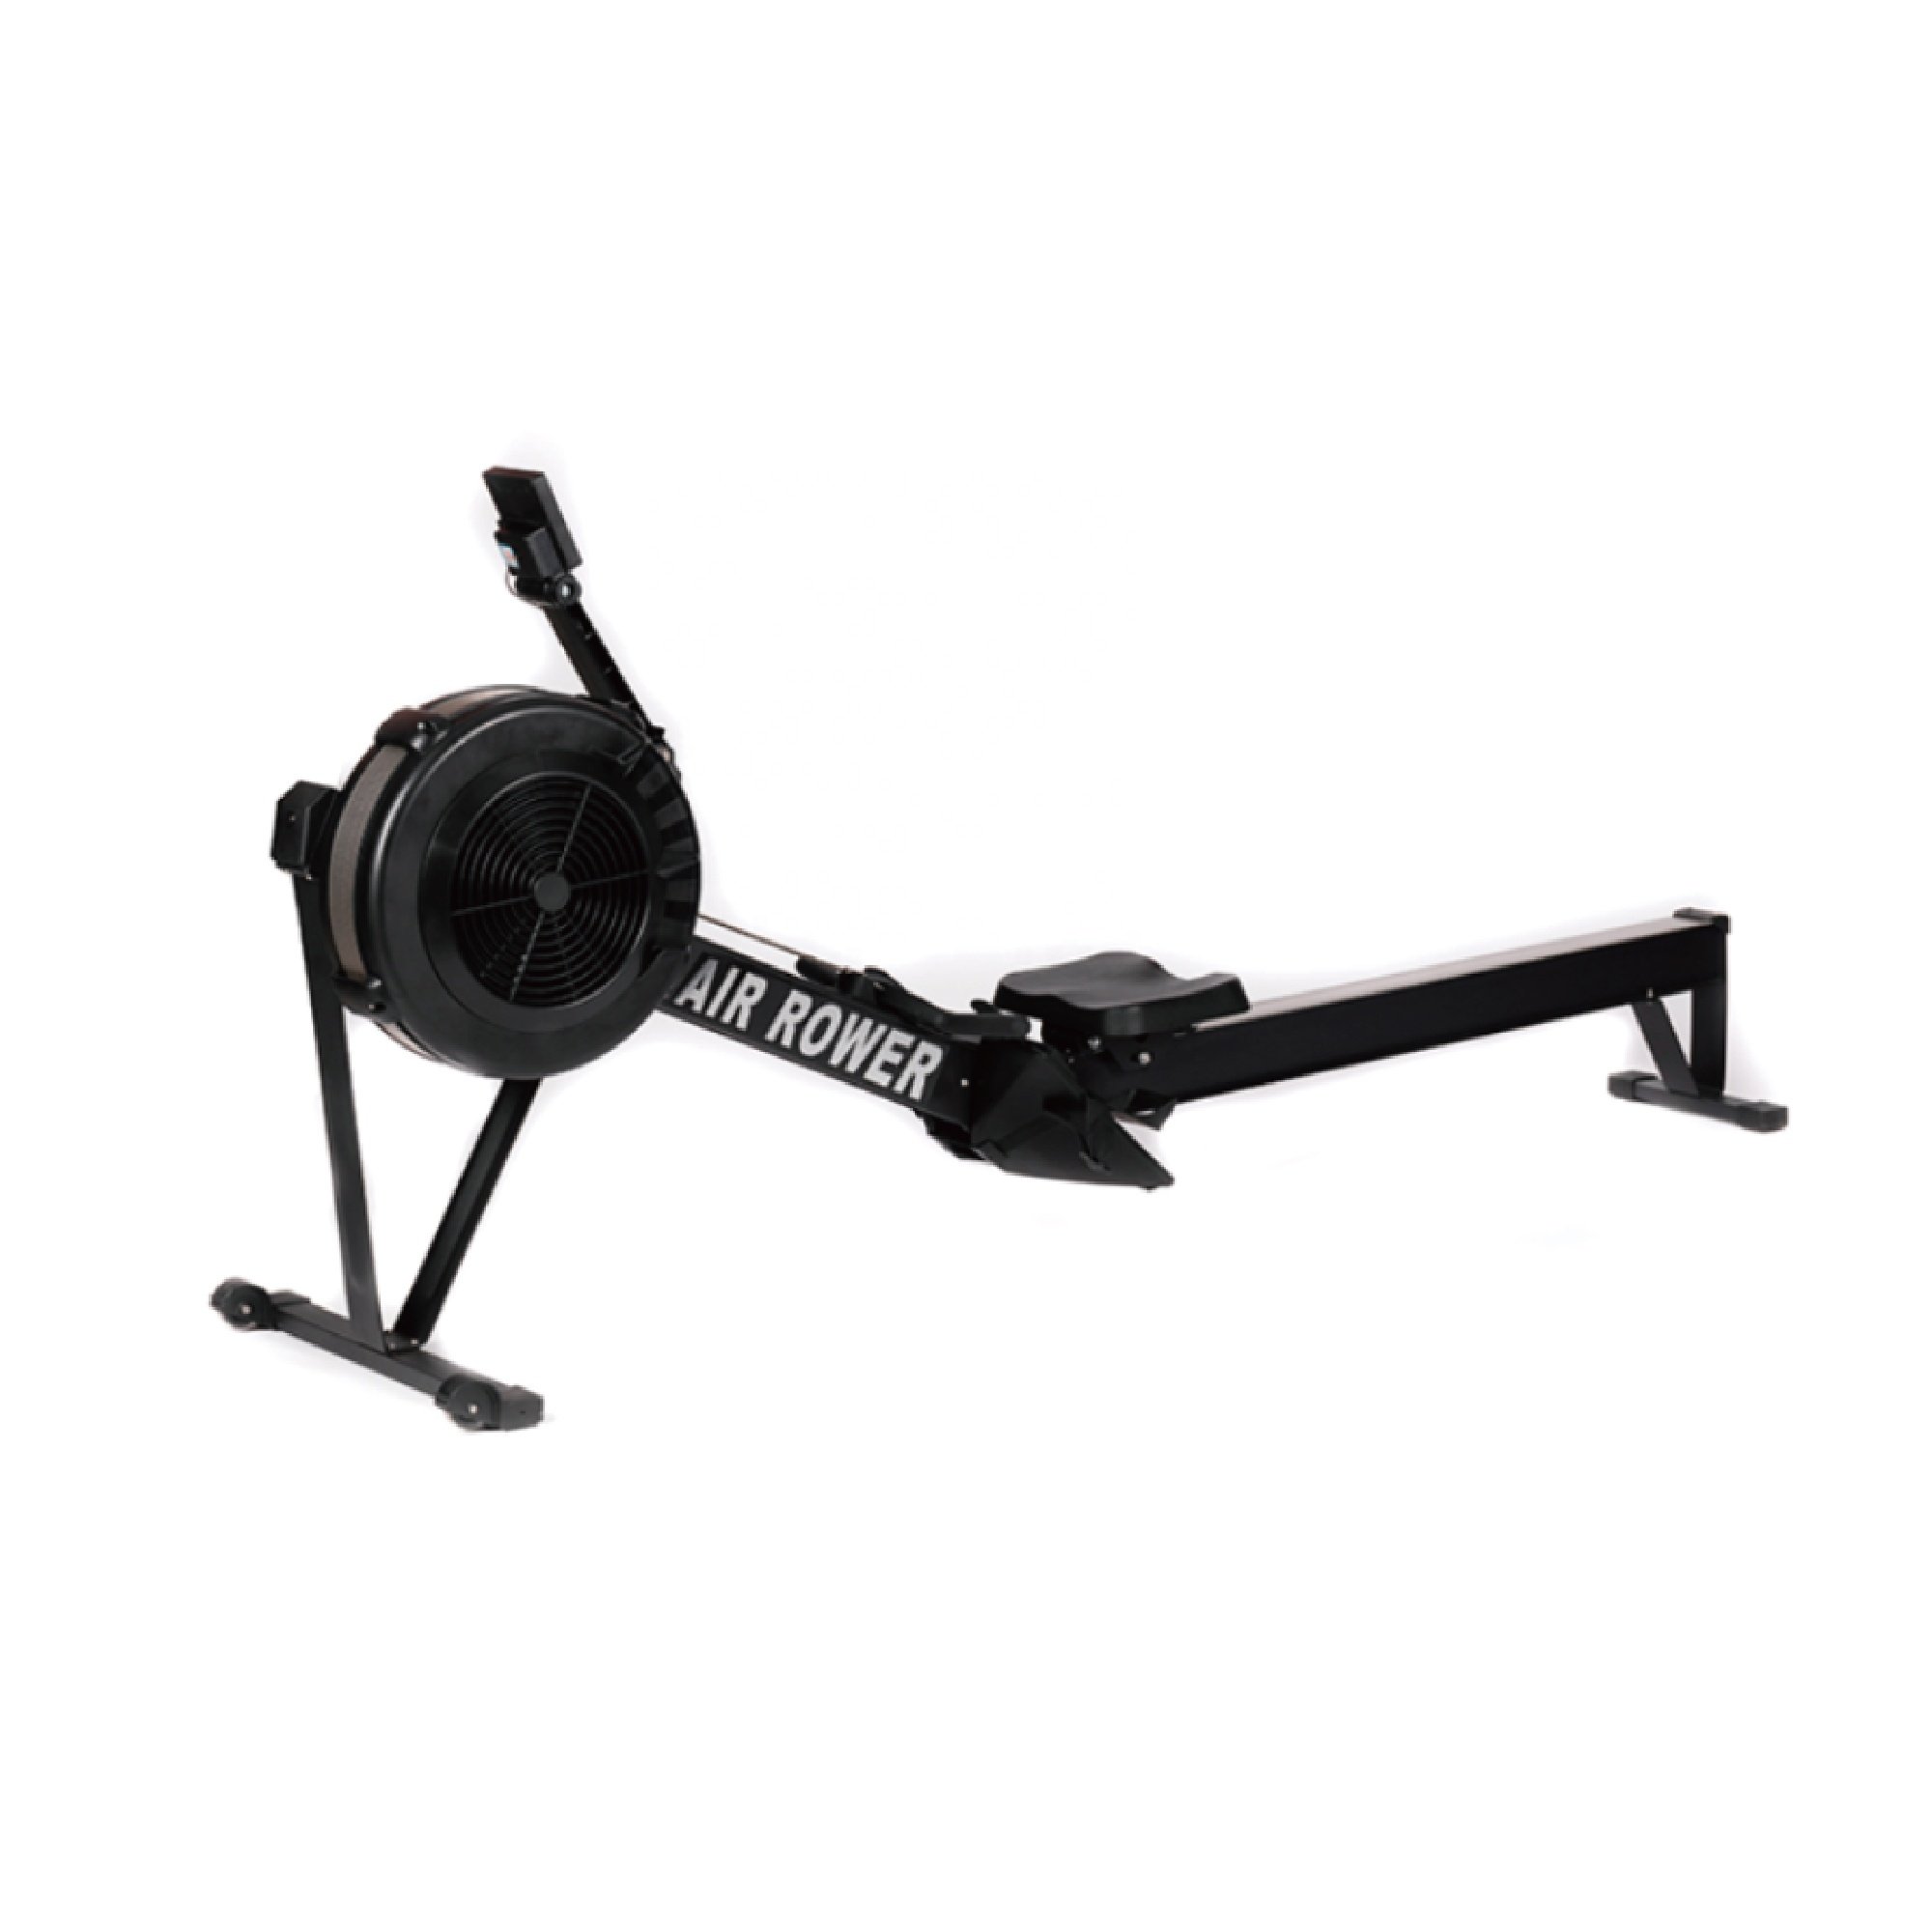 Magnetic Rower Machine with Silence Resistance for Whole Body Rowing with LCD Monitor for Home Gym, Cardio Exercise and Strength